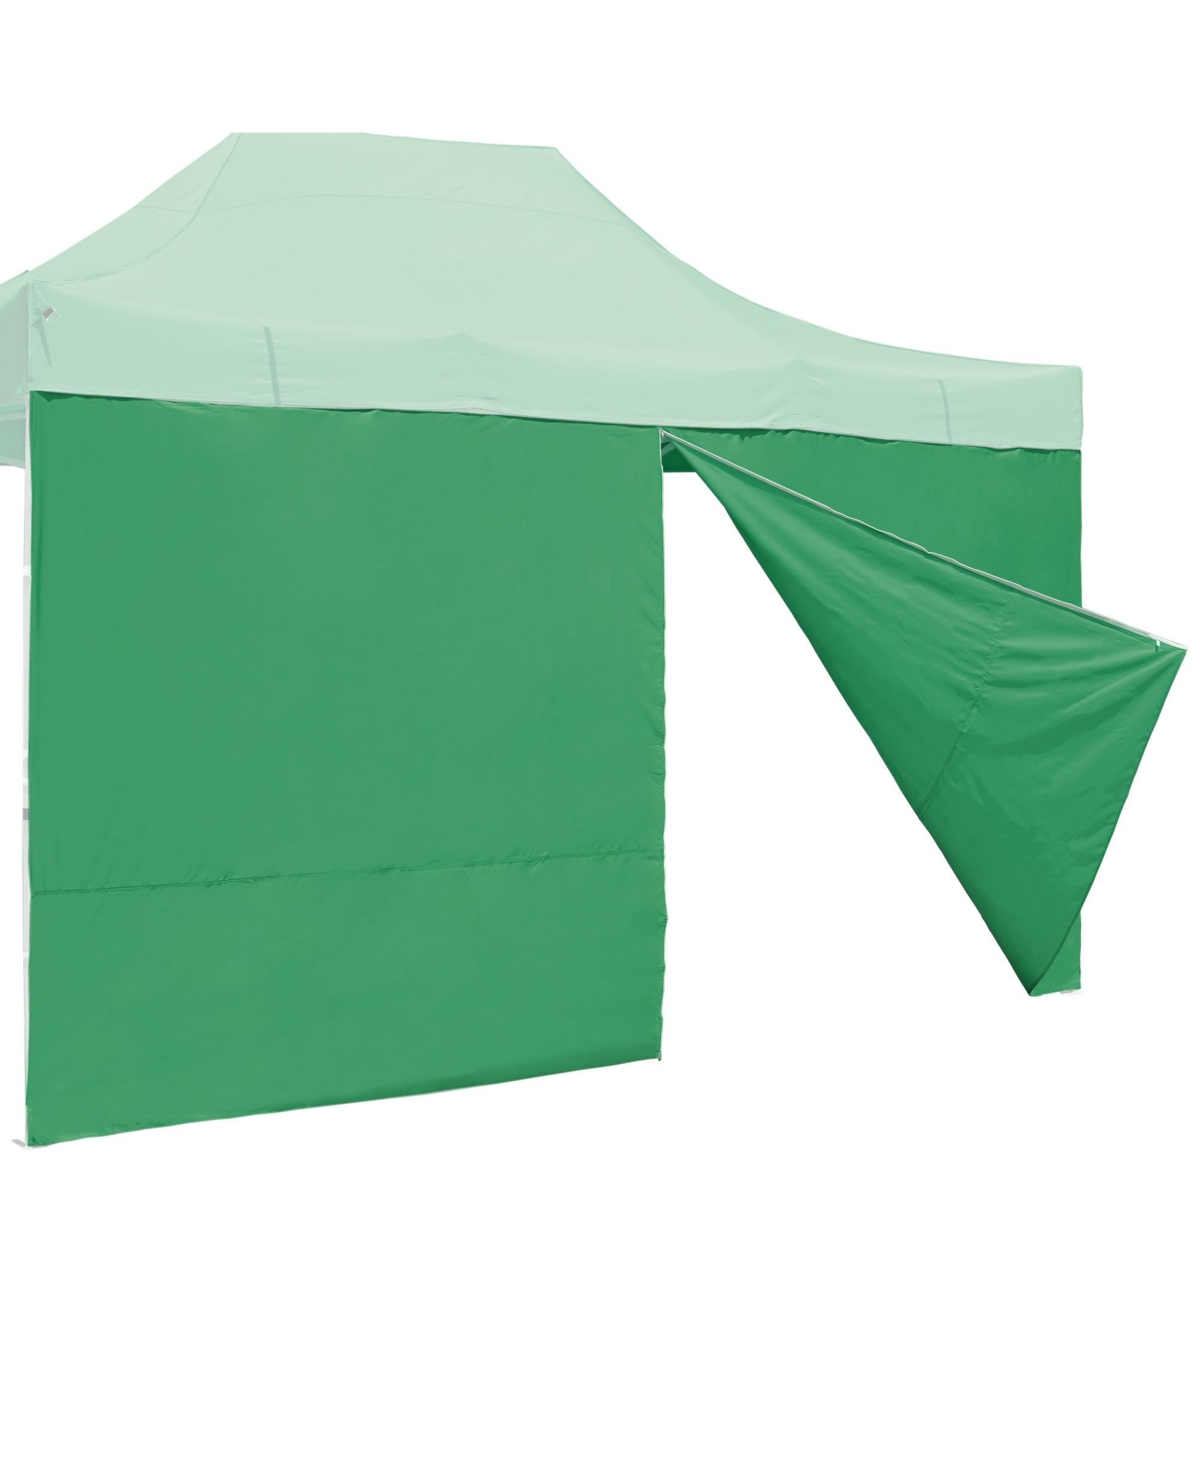 1 Pack Side Wall for 10x15 Ft Ez Pop Up Canopy Tent UV50+ Zipper Yard - Green